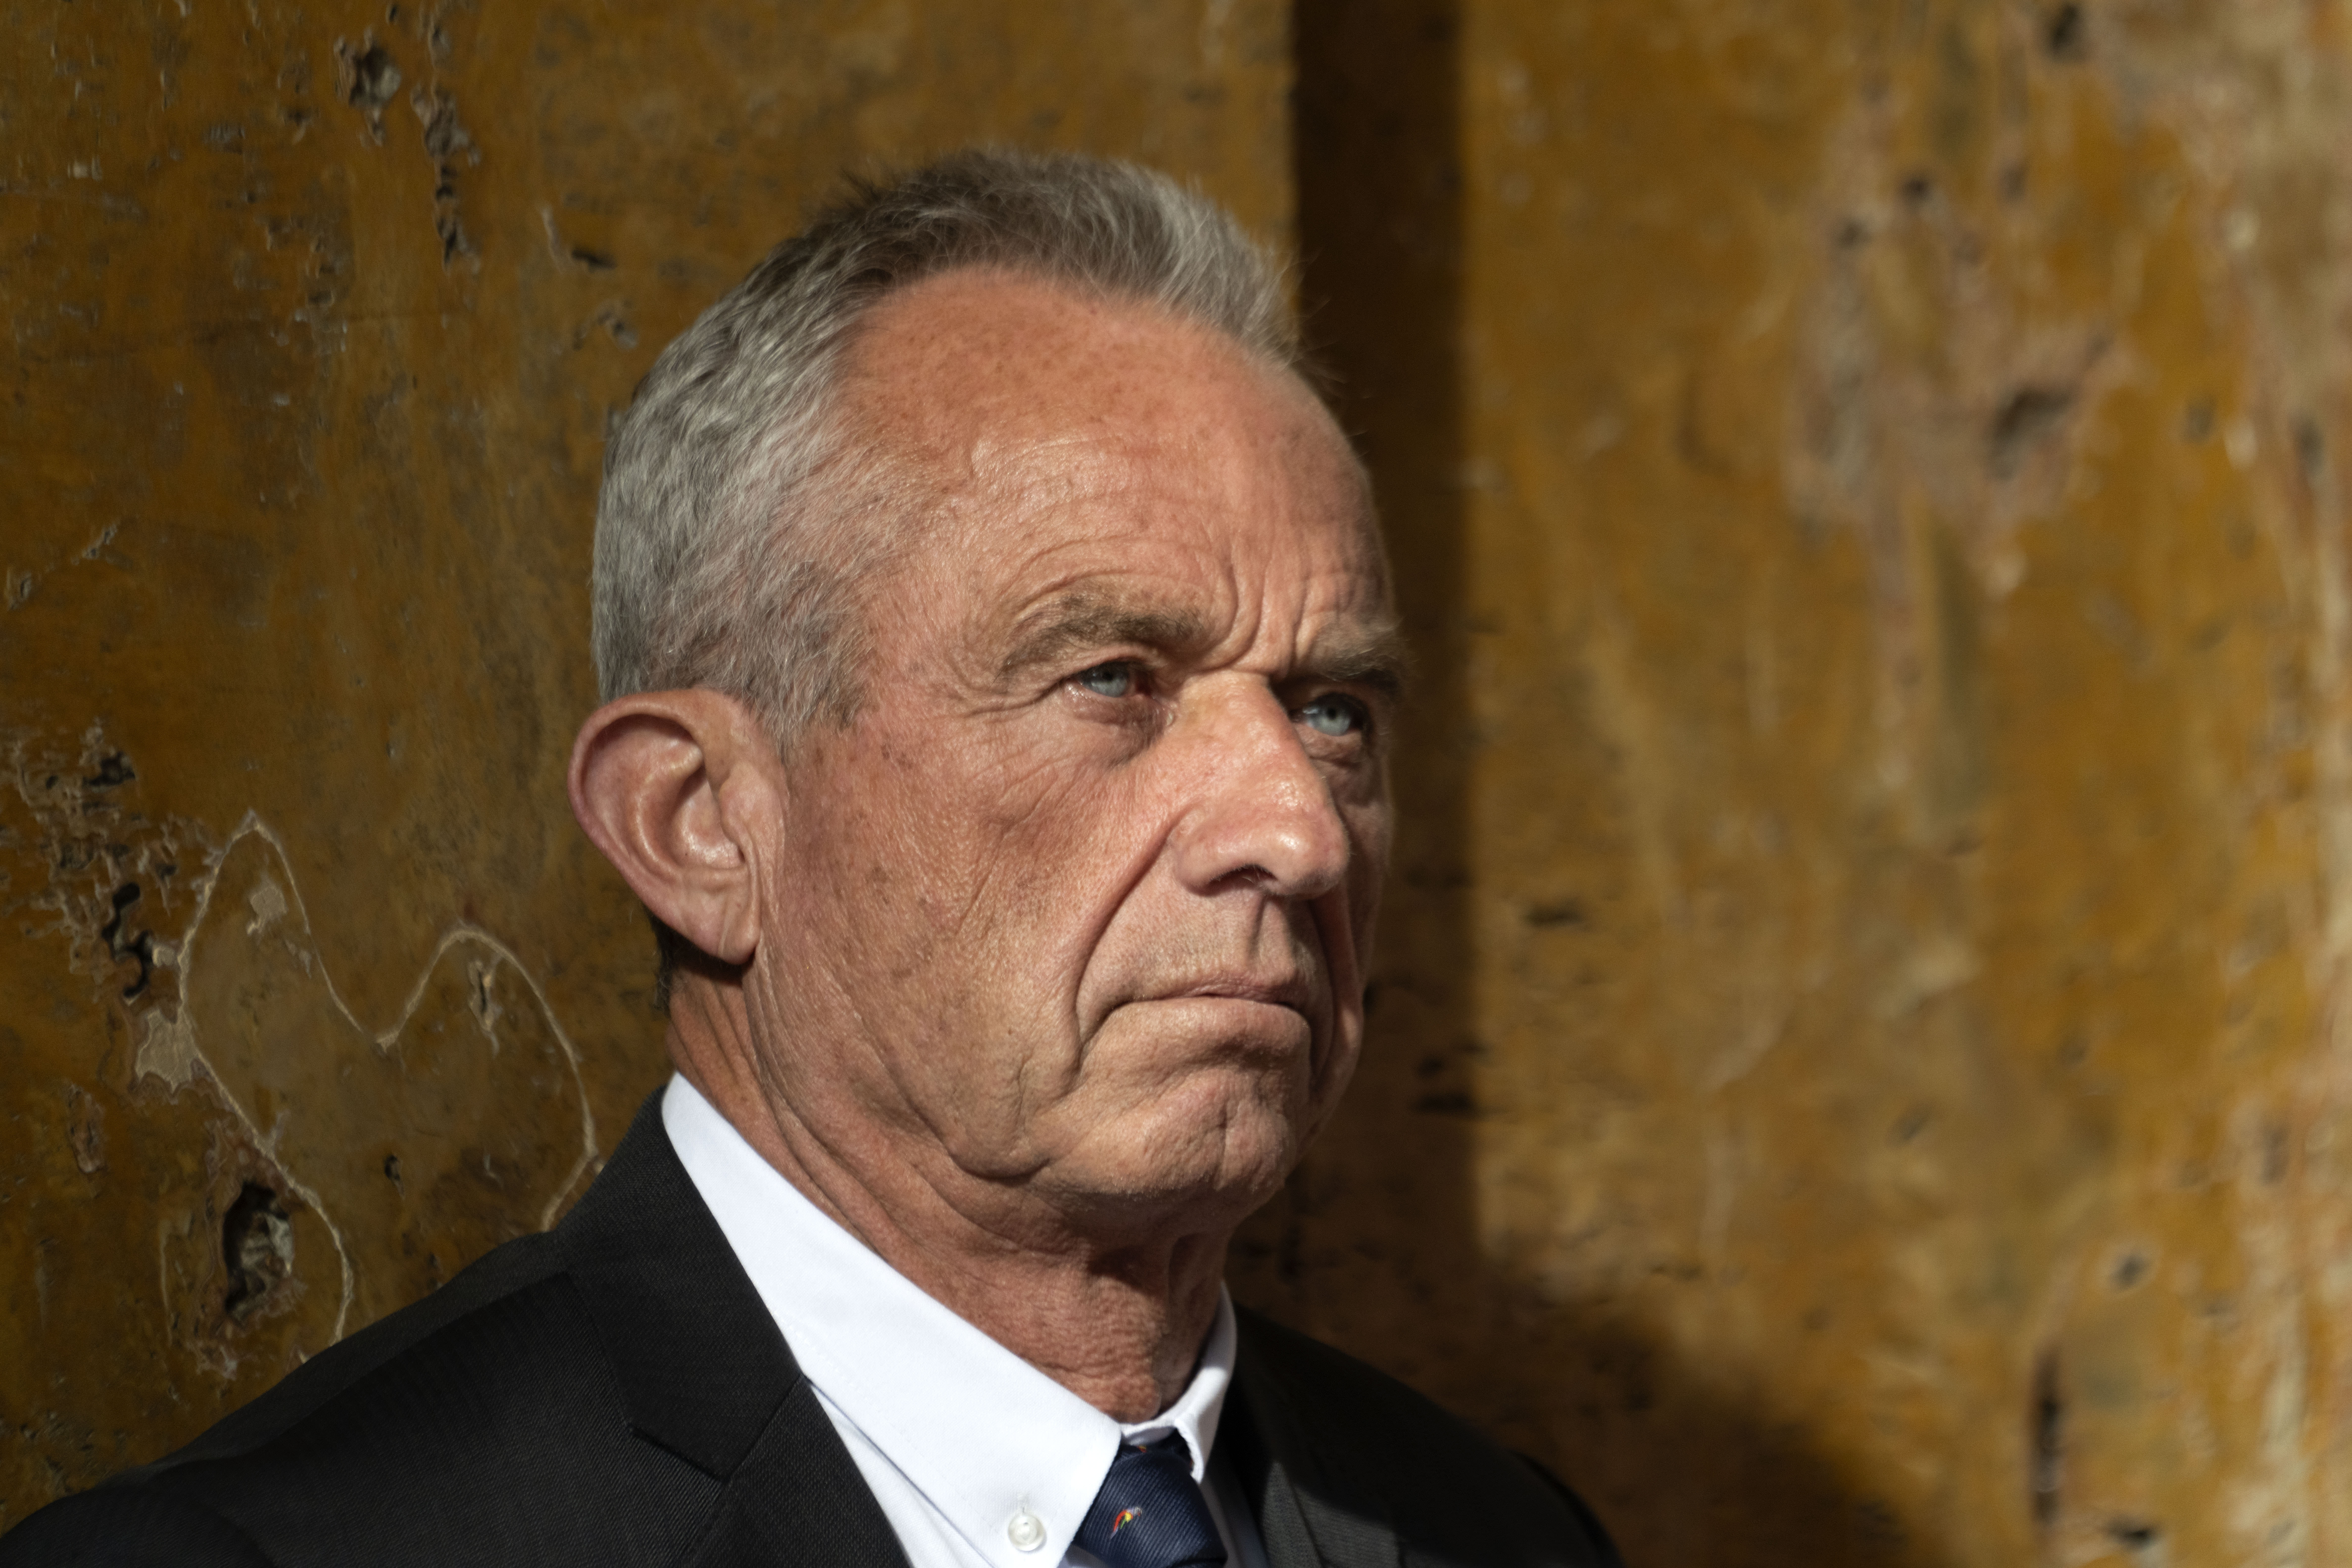 RFK Jr. claims a doctor told him a worm ate part of his brain, reports New York Times